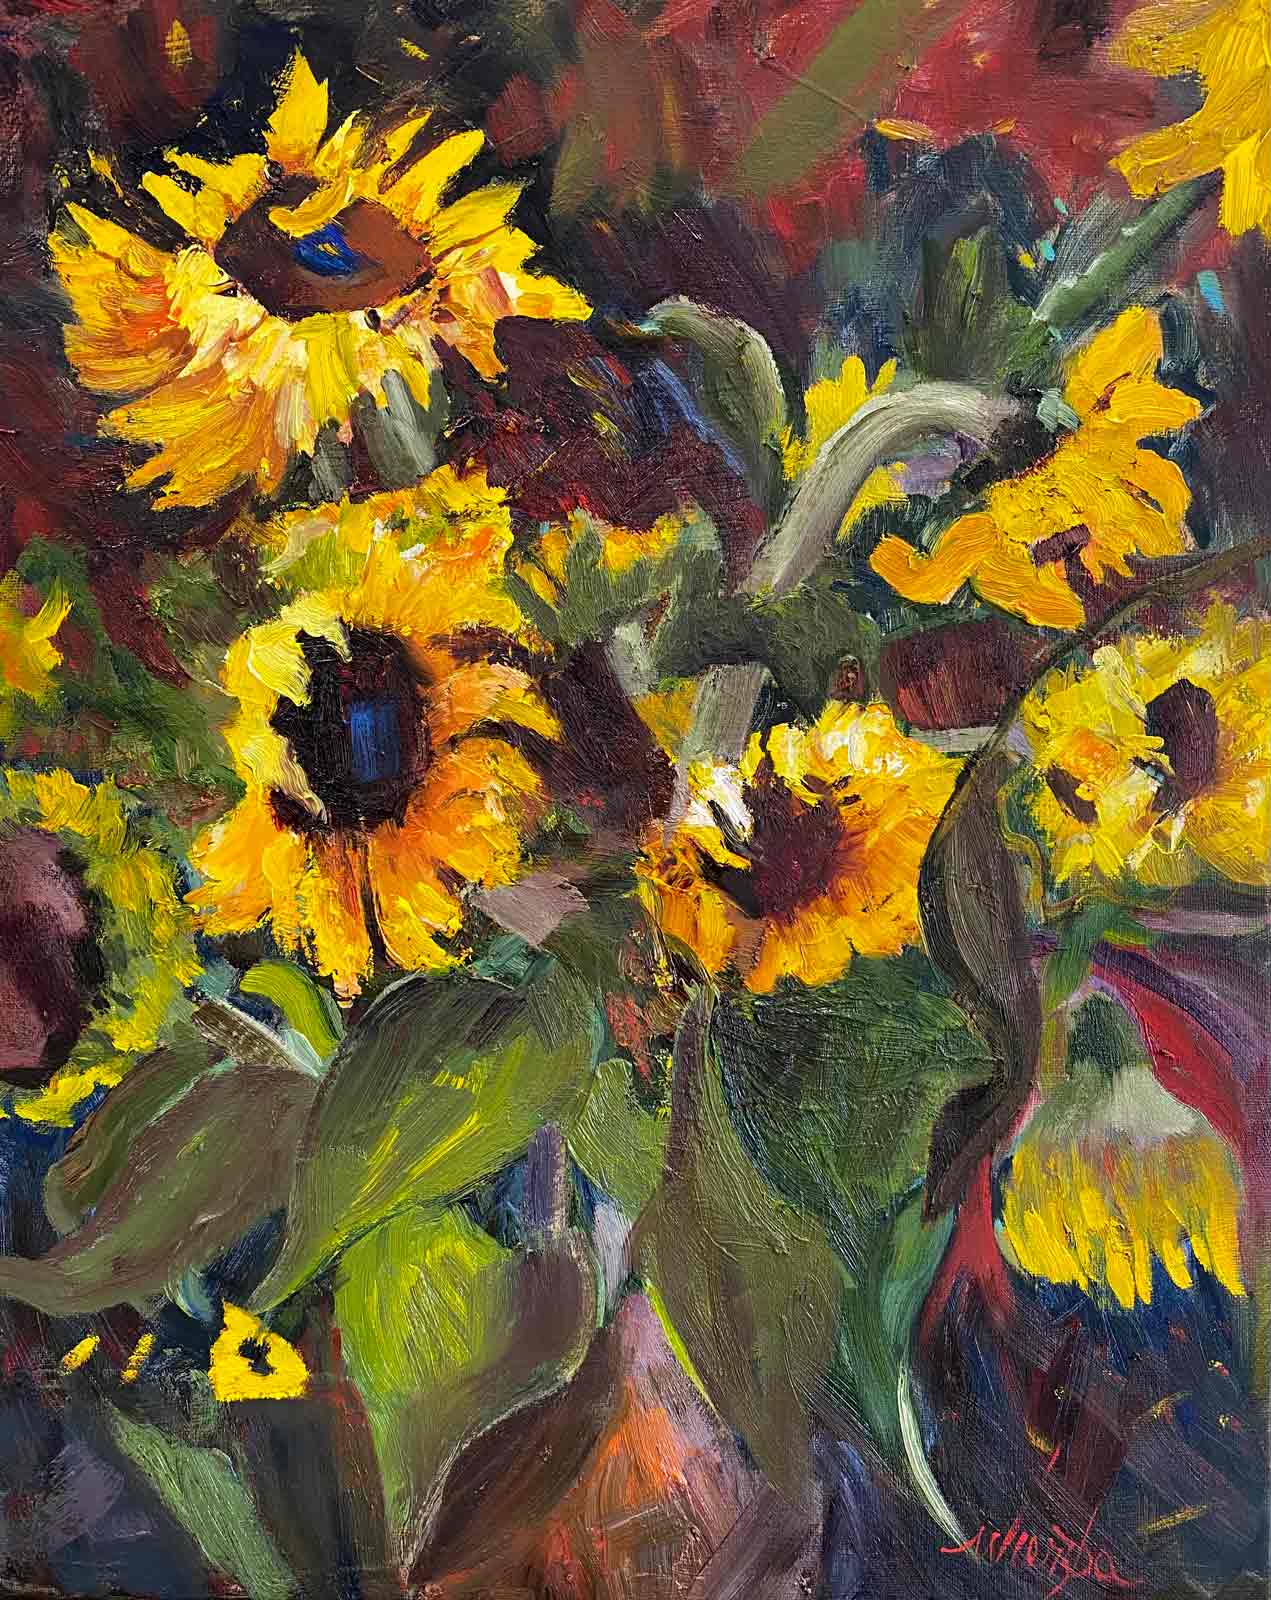 Impressionistic painting of sunflowers by Shelly Wierzba Oregon artist.